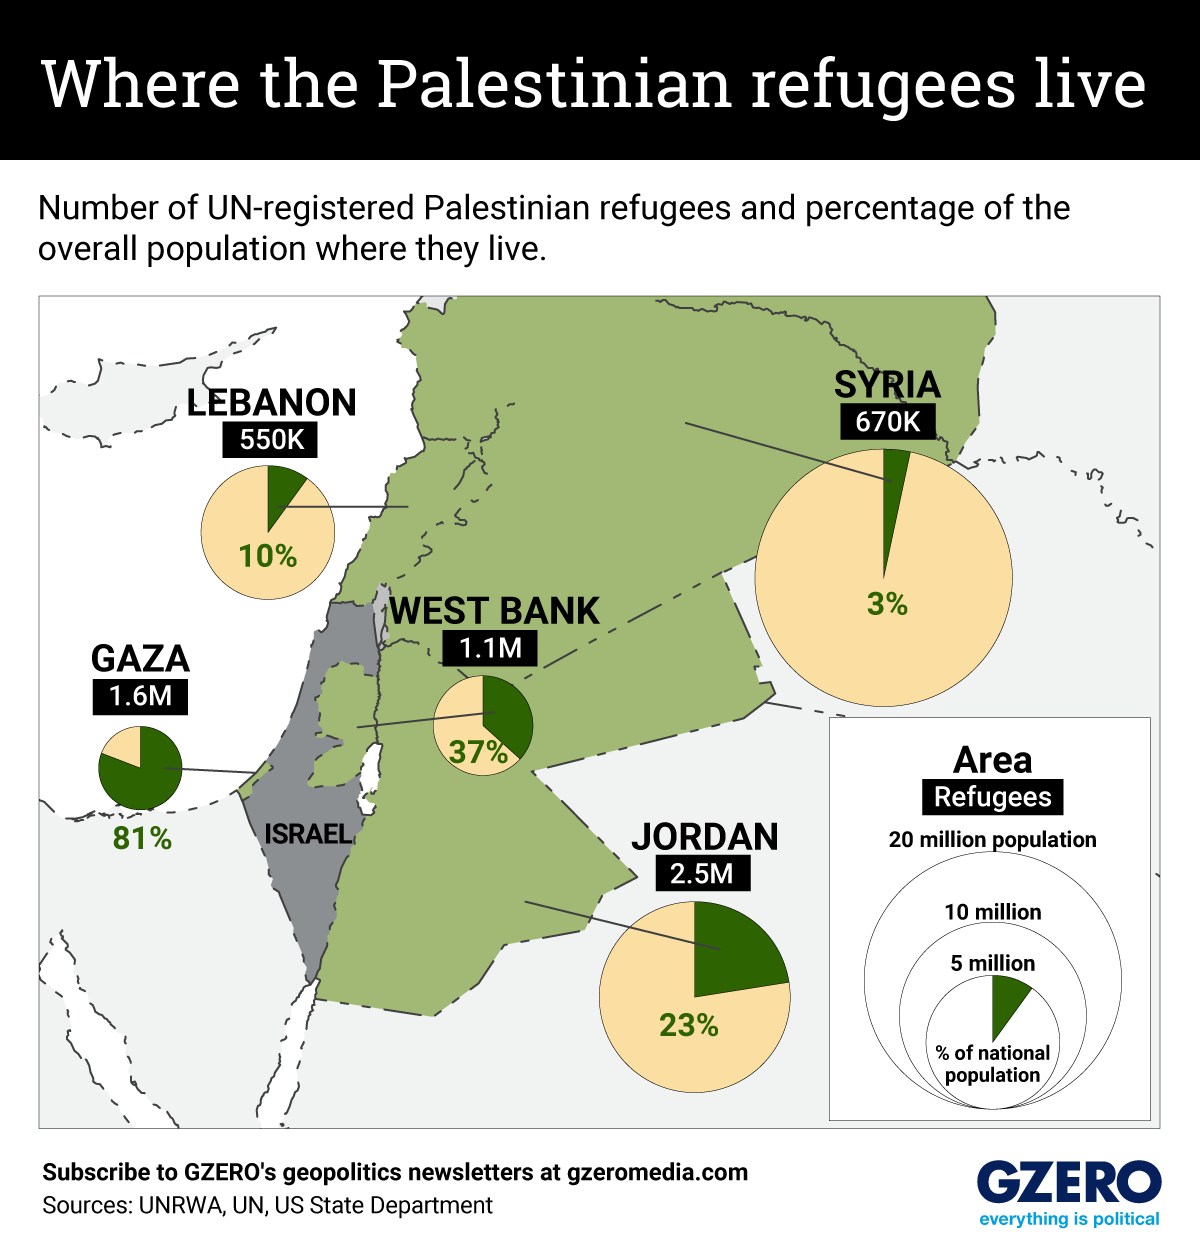 The Graphic Truth: Where do Palestinian refugees live?